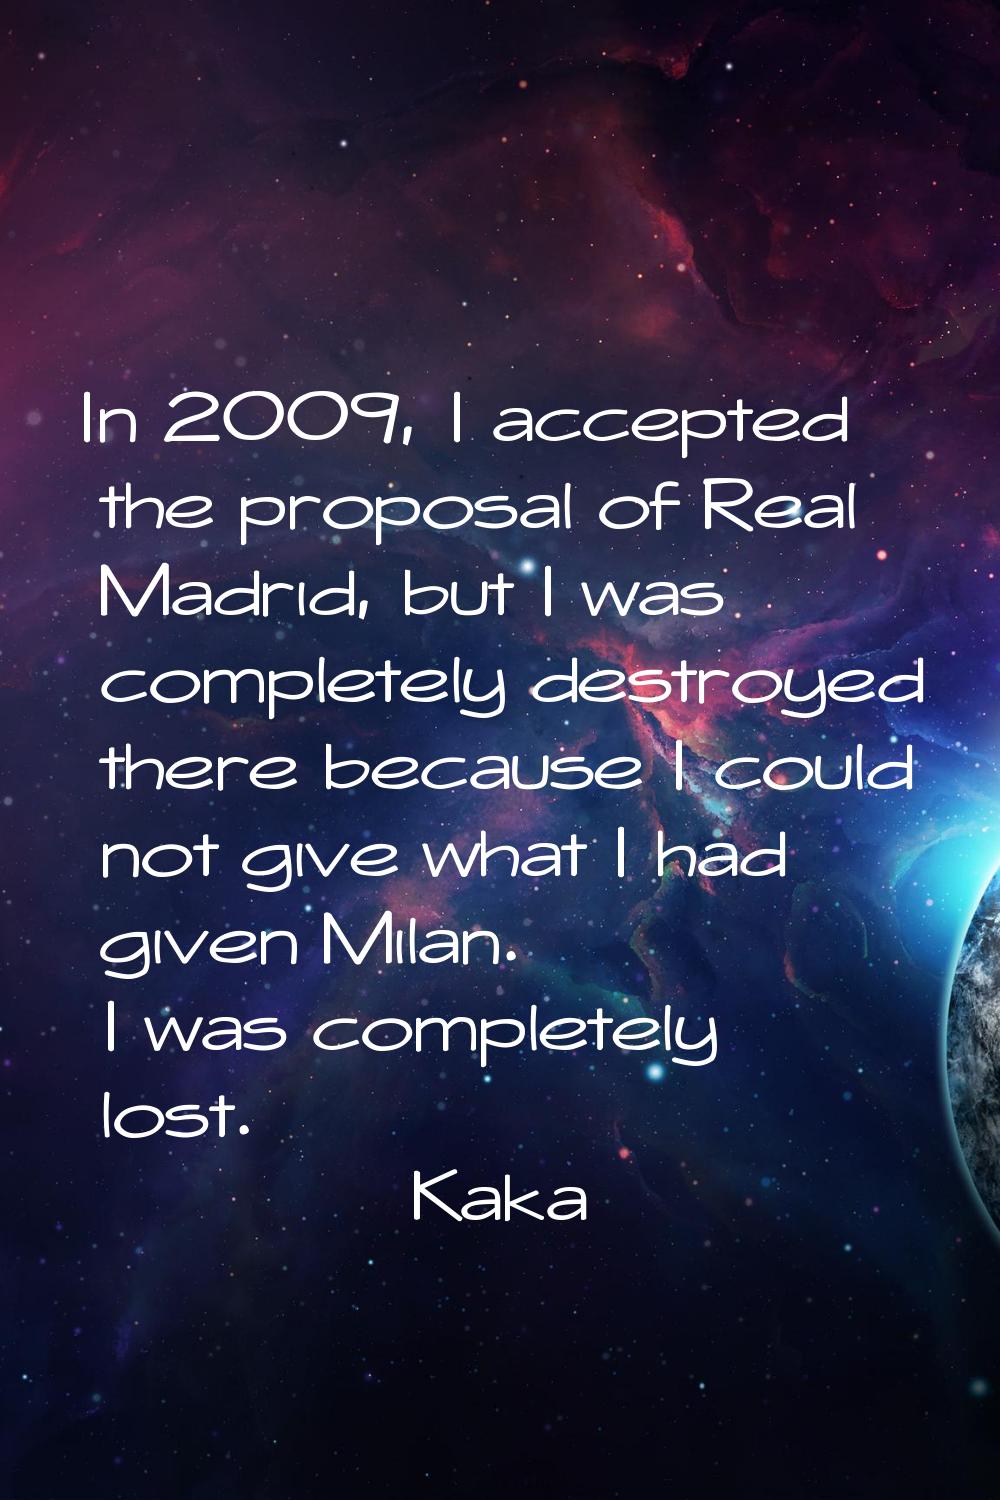 In 2009, I accepted the proposal of Real Madrid, but I was completely destroyed there because I cou